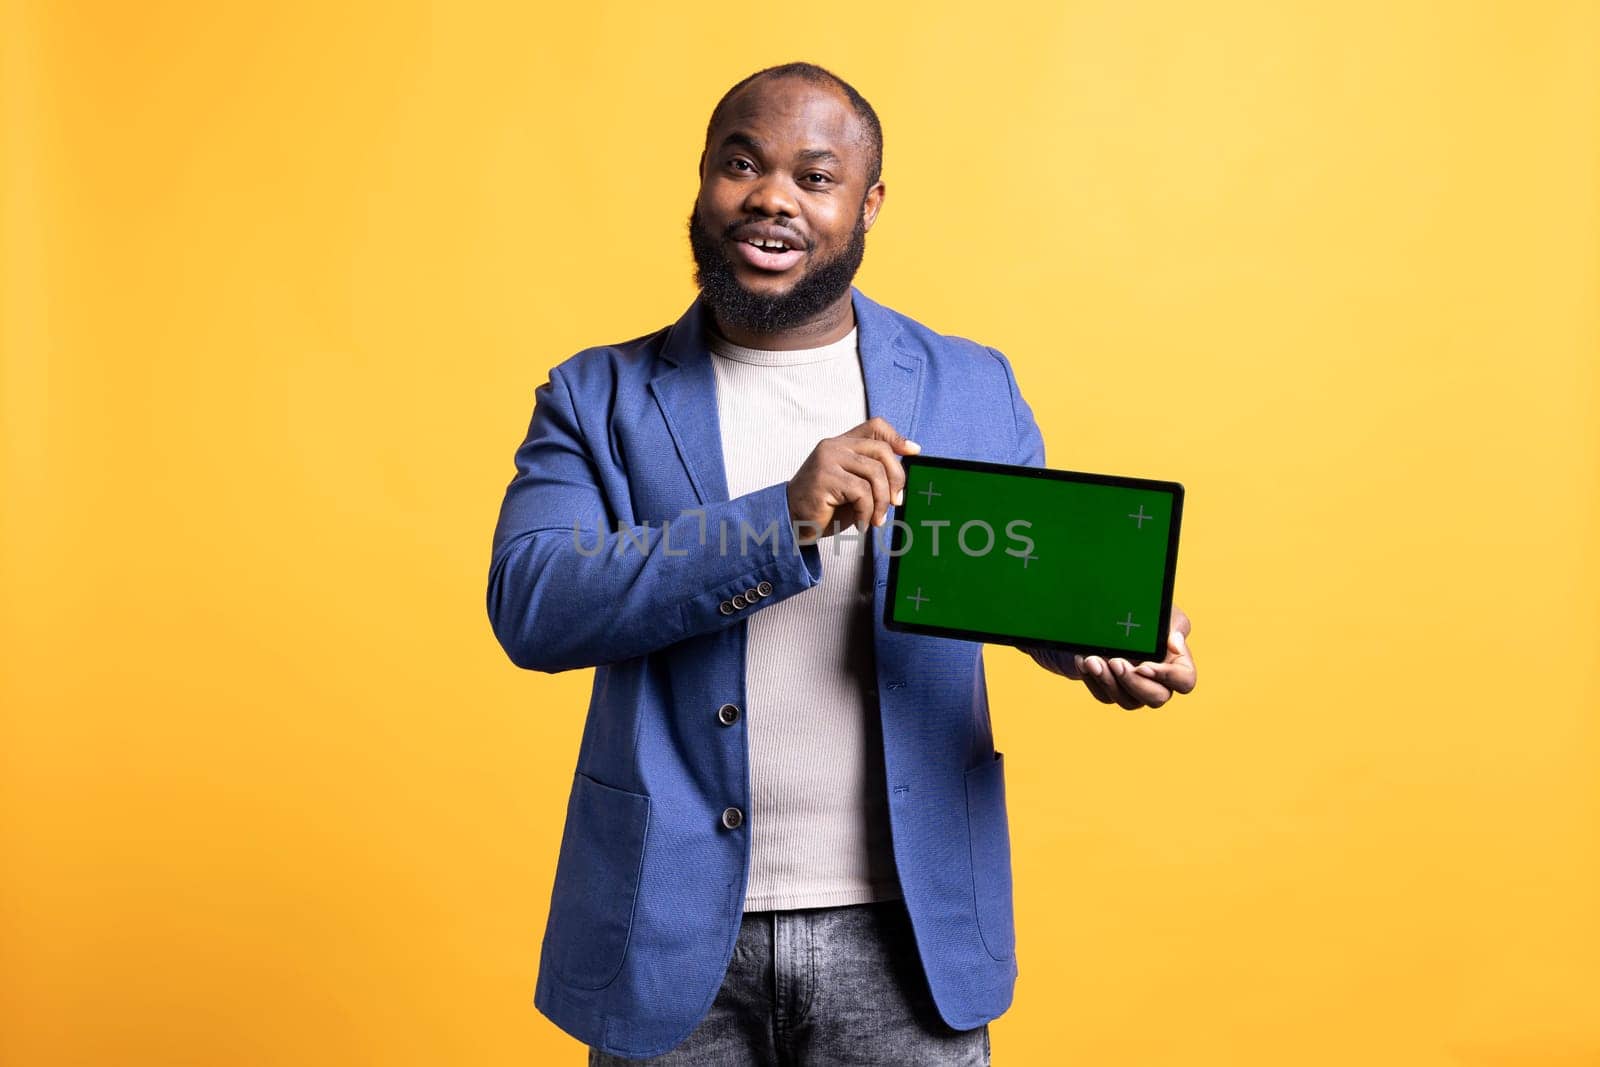 Jolly man presenting video on green screen tablet, studio background by DCStudio